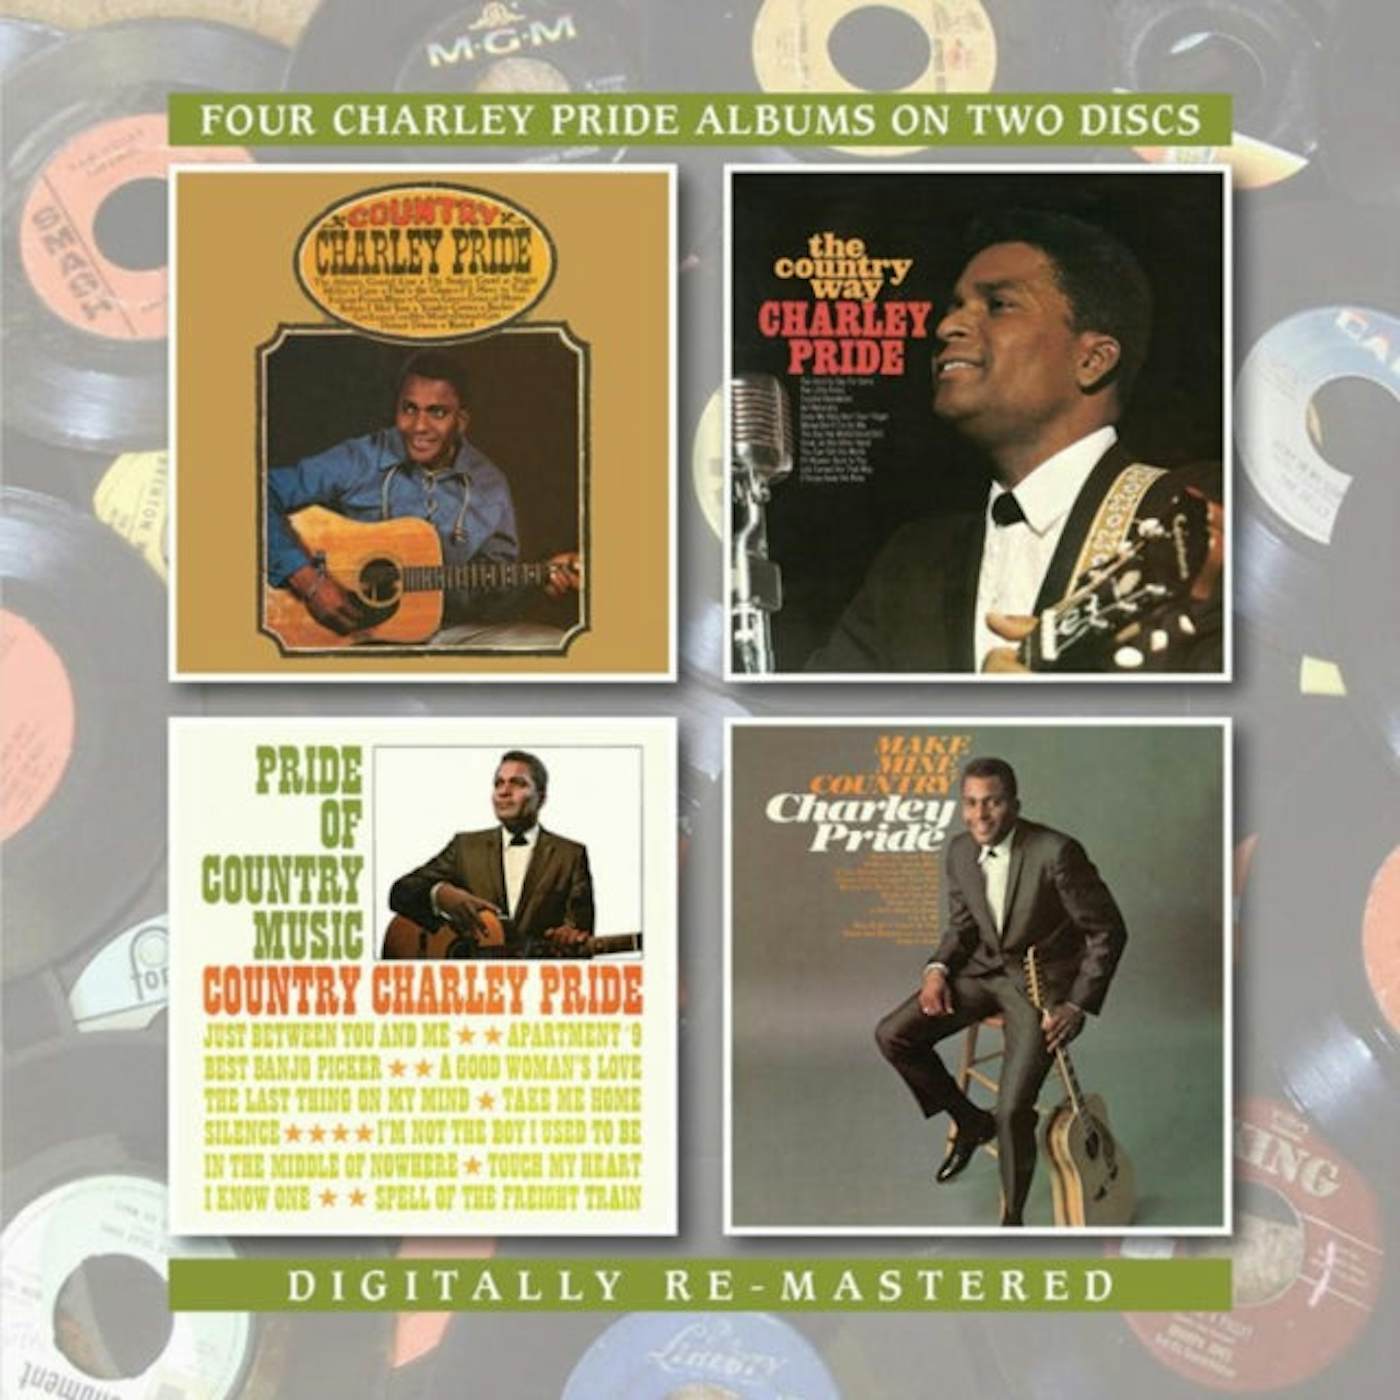 Charley Pride CD - Country Charley Pride / The Country Way / Pride Of Country Music